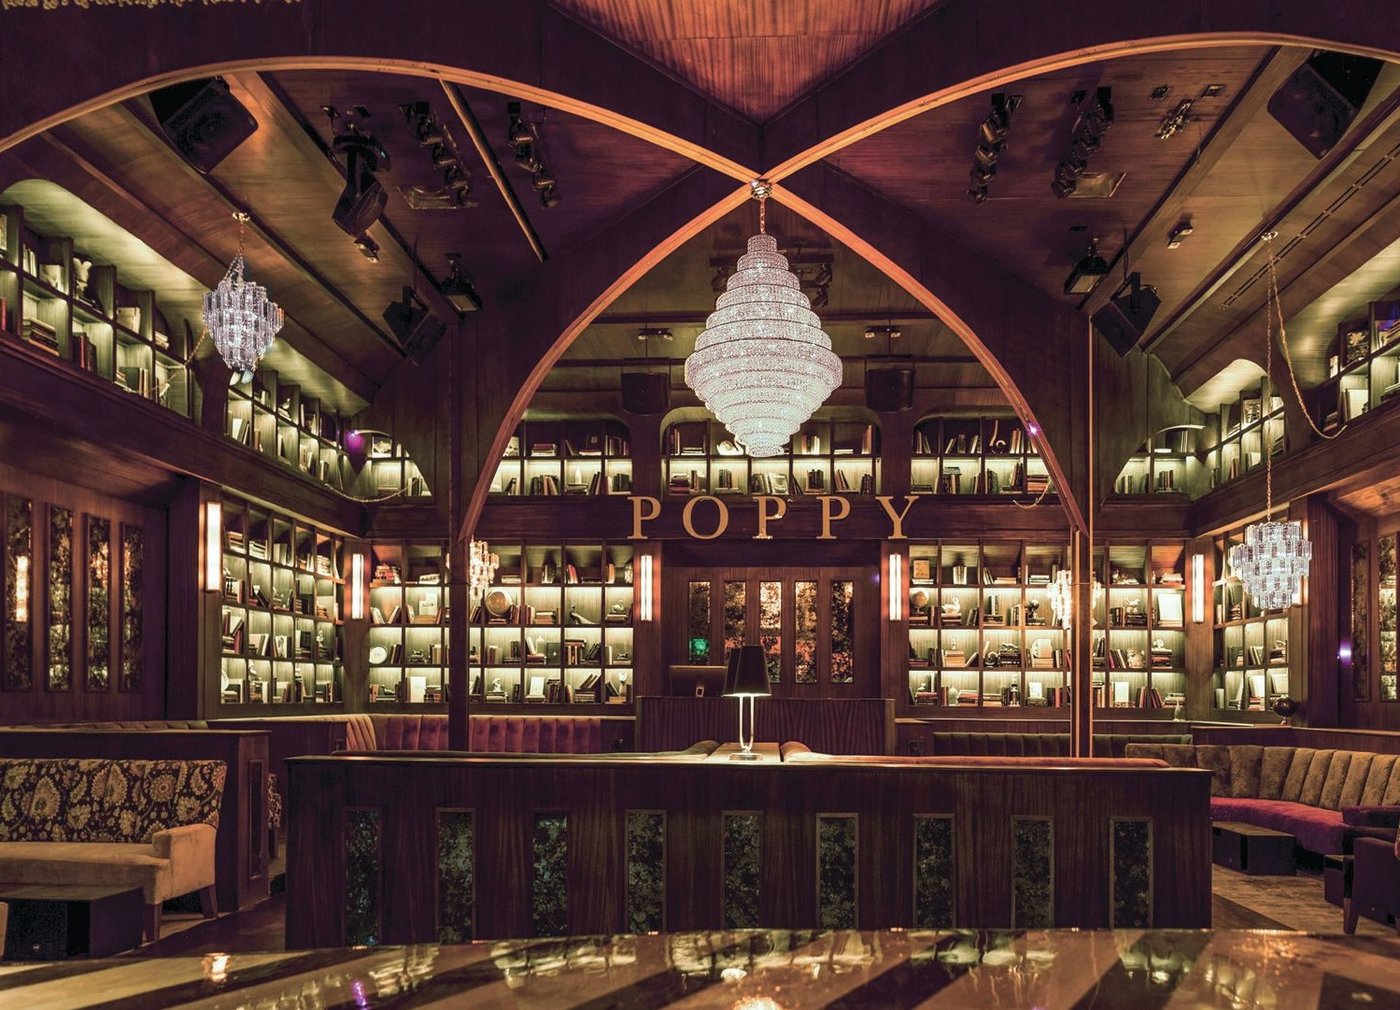 Interior of Poppy, a hot nightlife destination that is served on Discotech PHOTO: BY ELIZABETH DANIELS